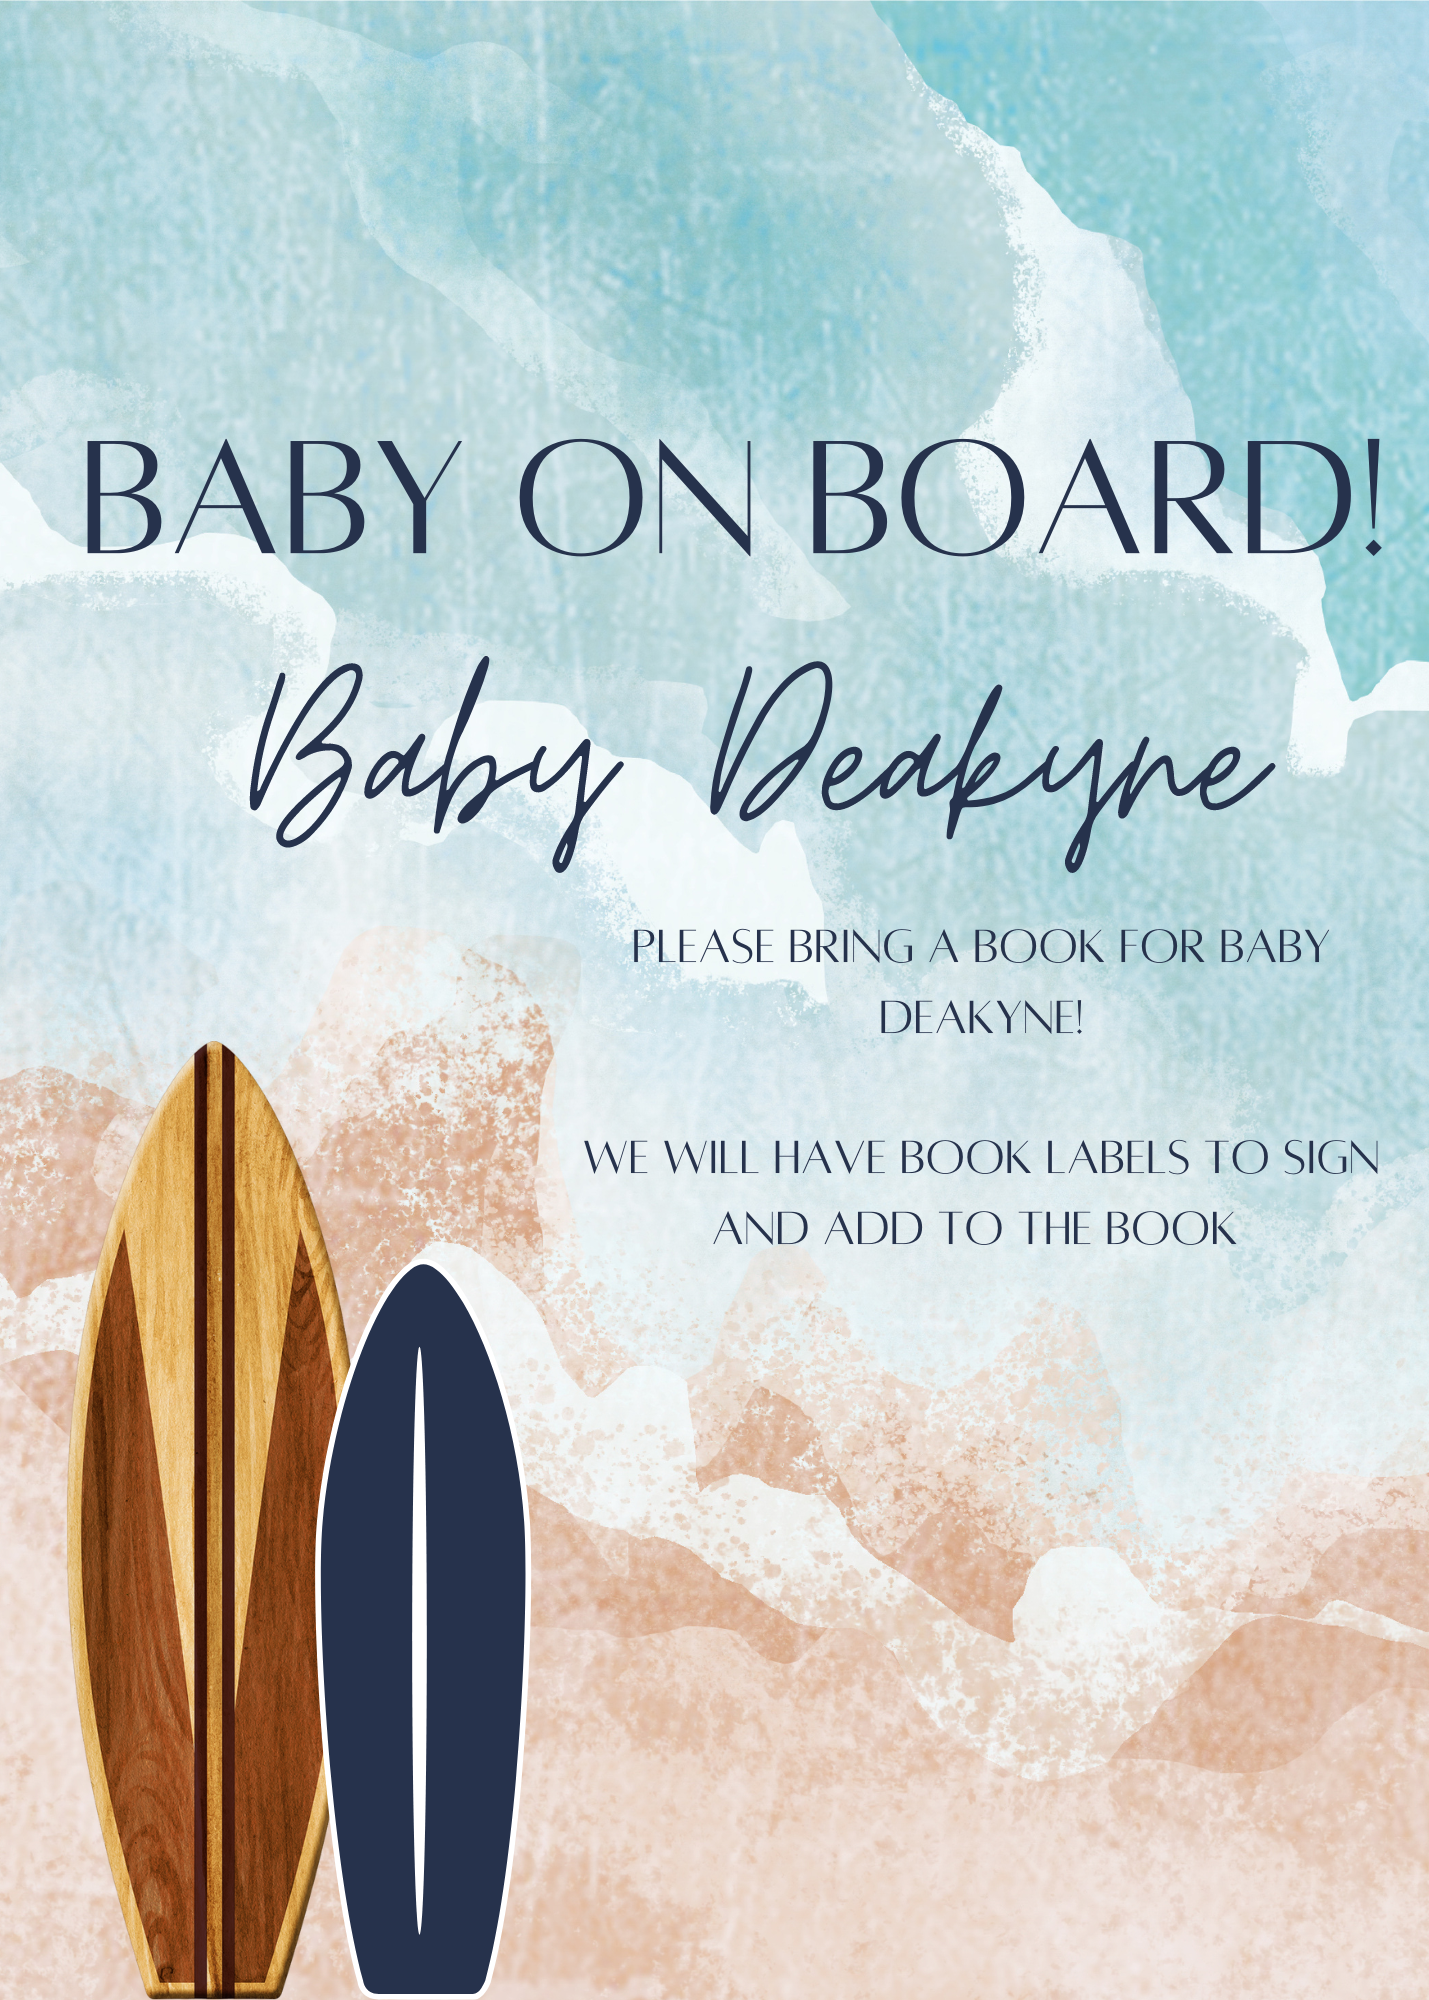 Baby on Board - Invitation to Download